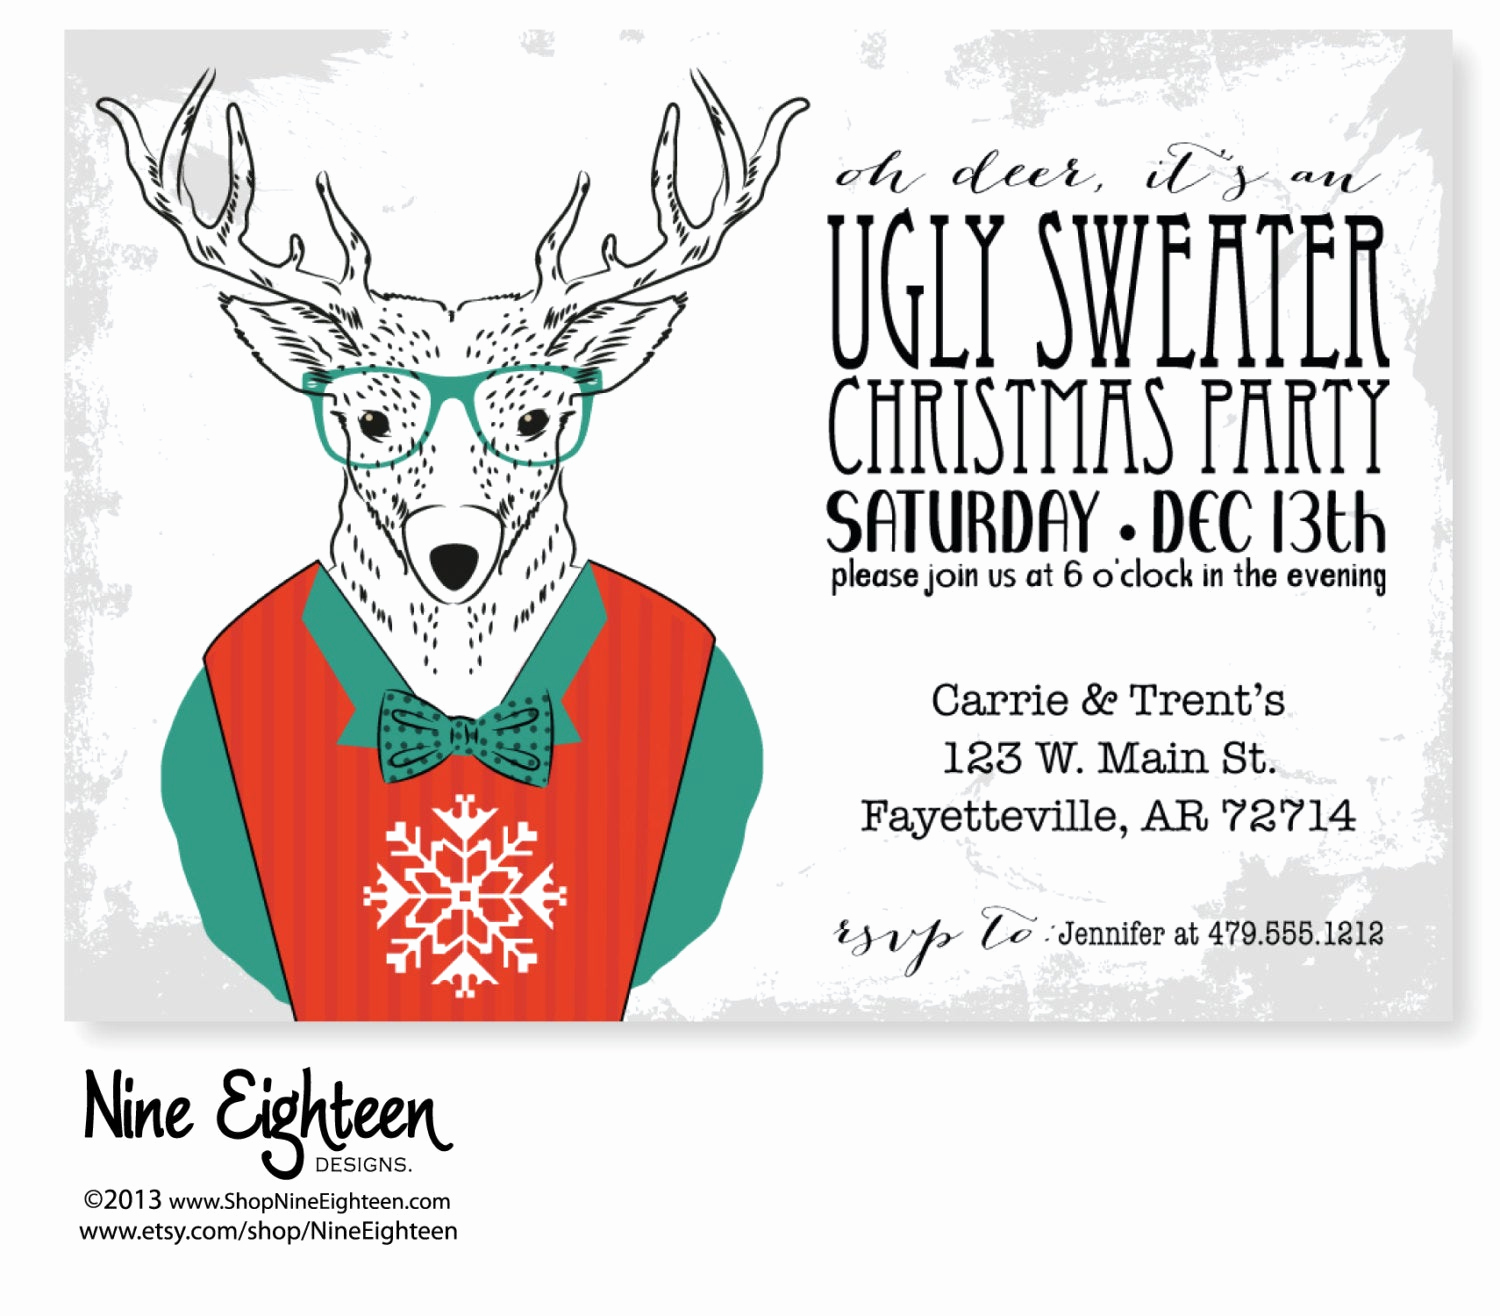 Ugly Sweater Christmas Party Invitation New Christmas Invitation for Ugly Sweater Party by Nineeighteen